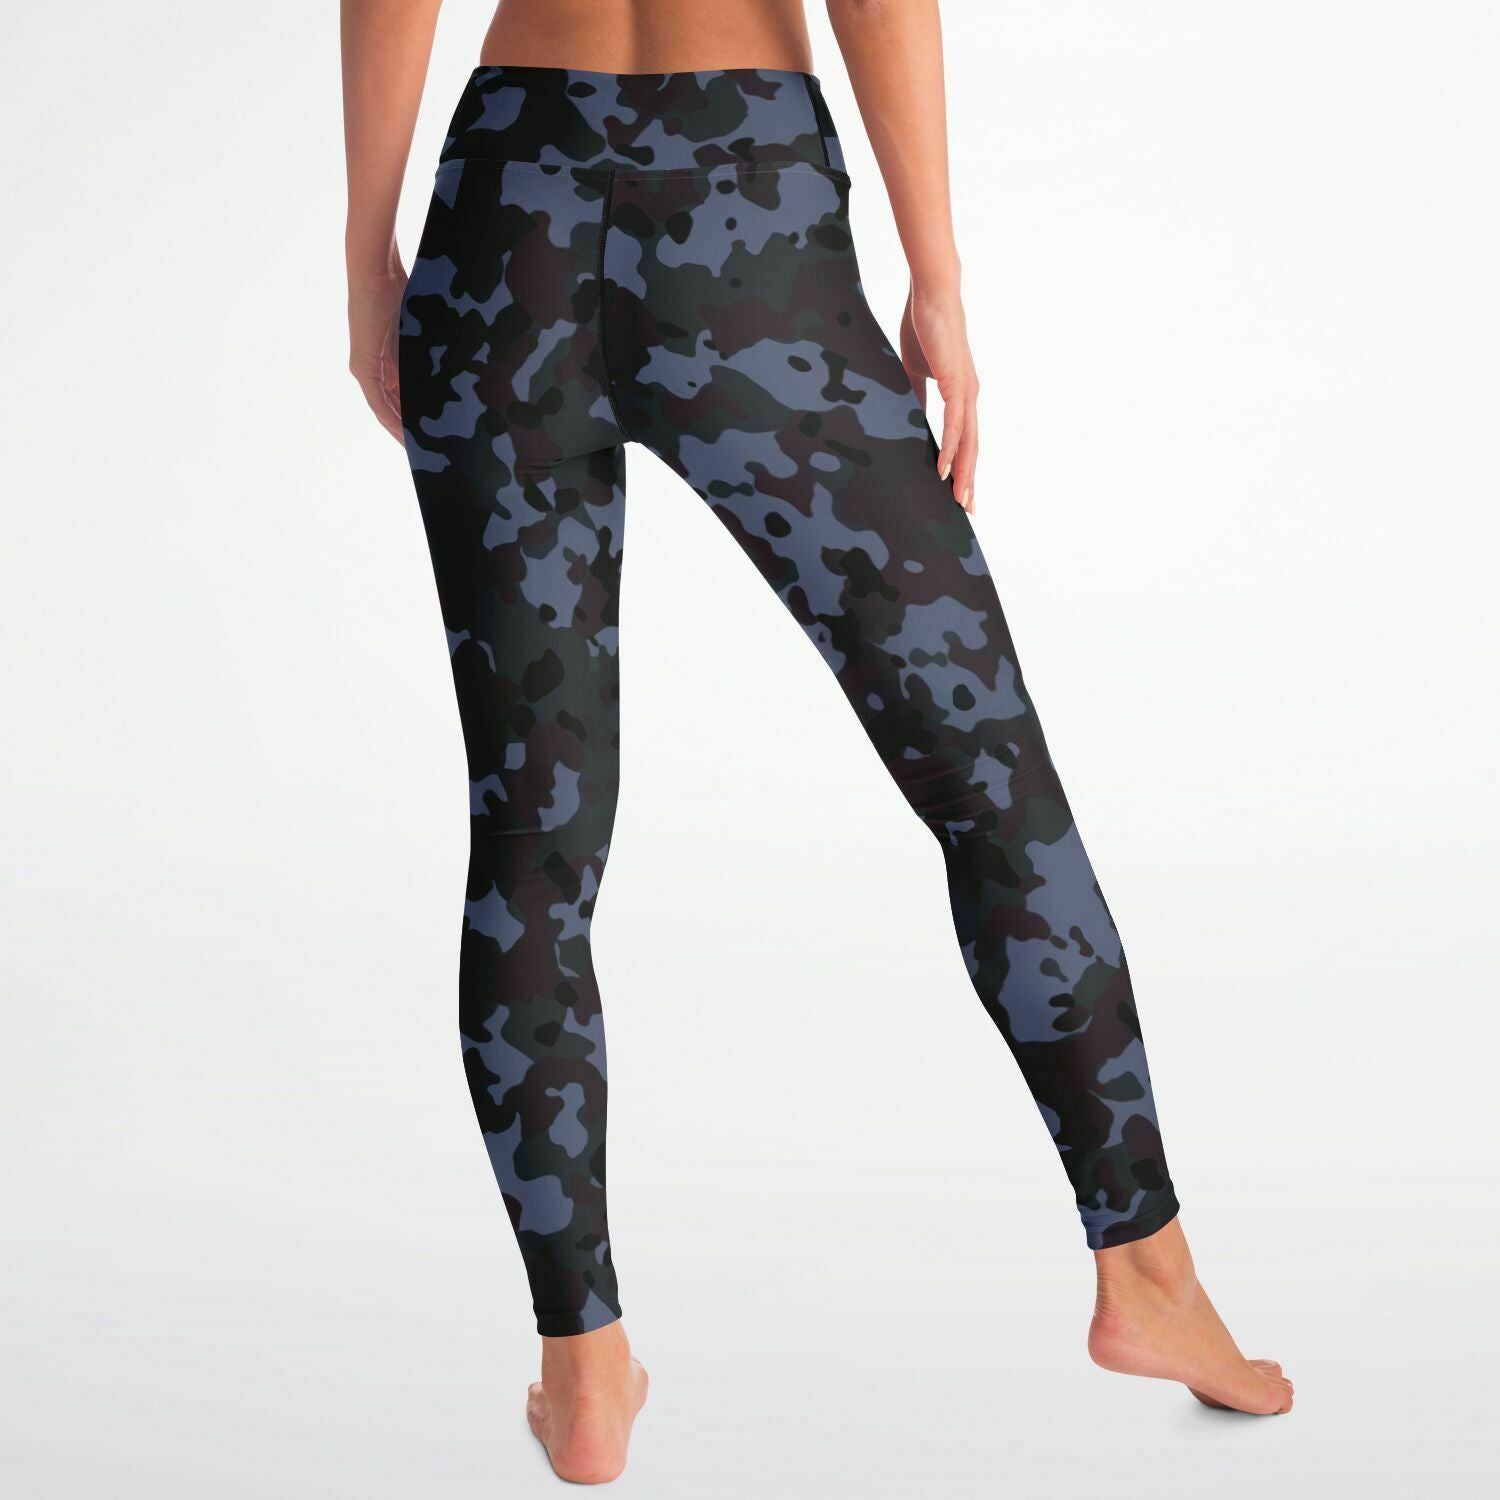 The Upside French Camo Leggings